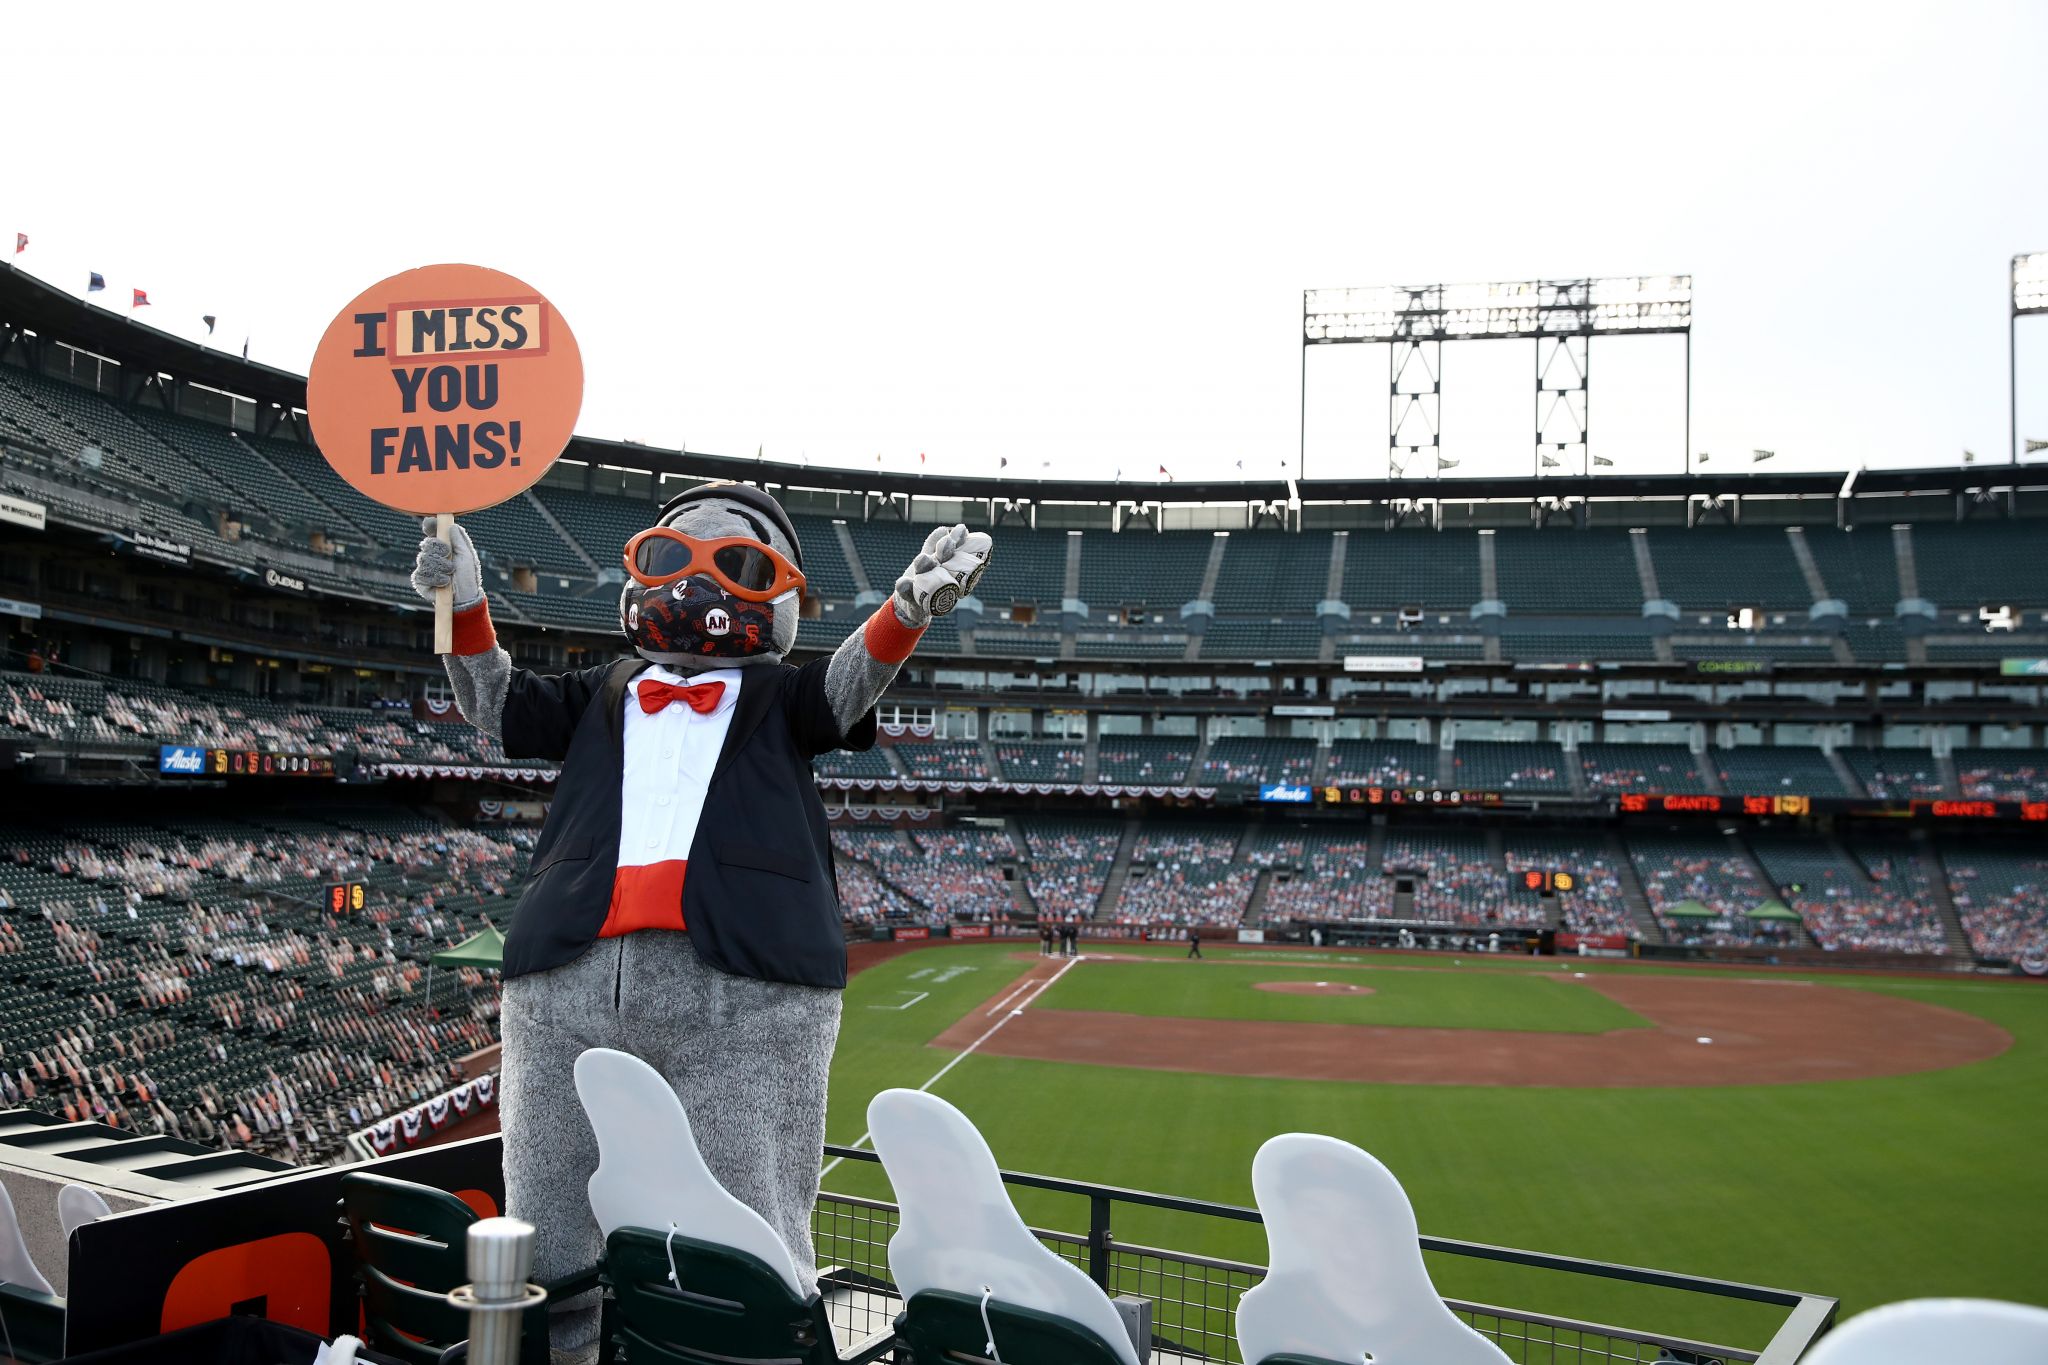 Photos: San Francisco Giants fans celebrate return to 'normalcy' at Oracle  Park home opener